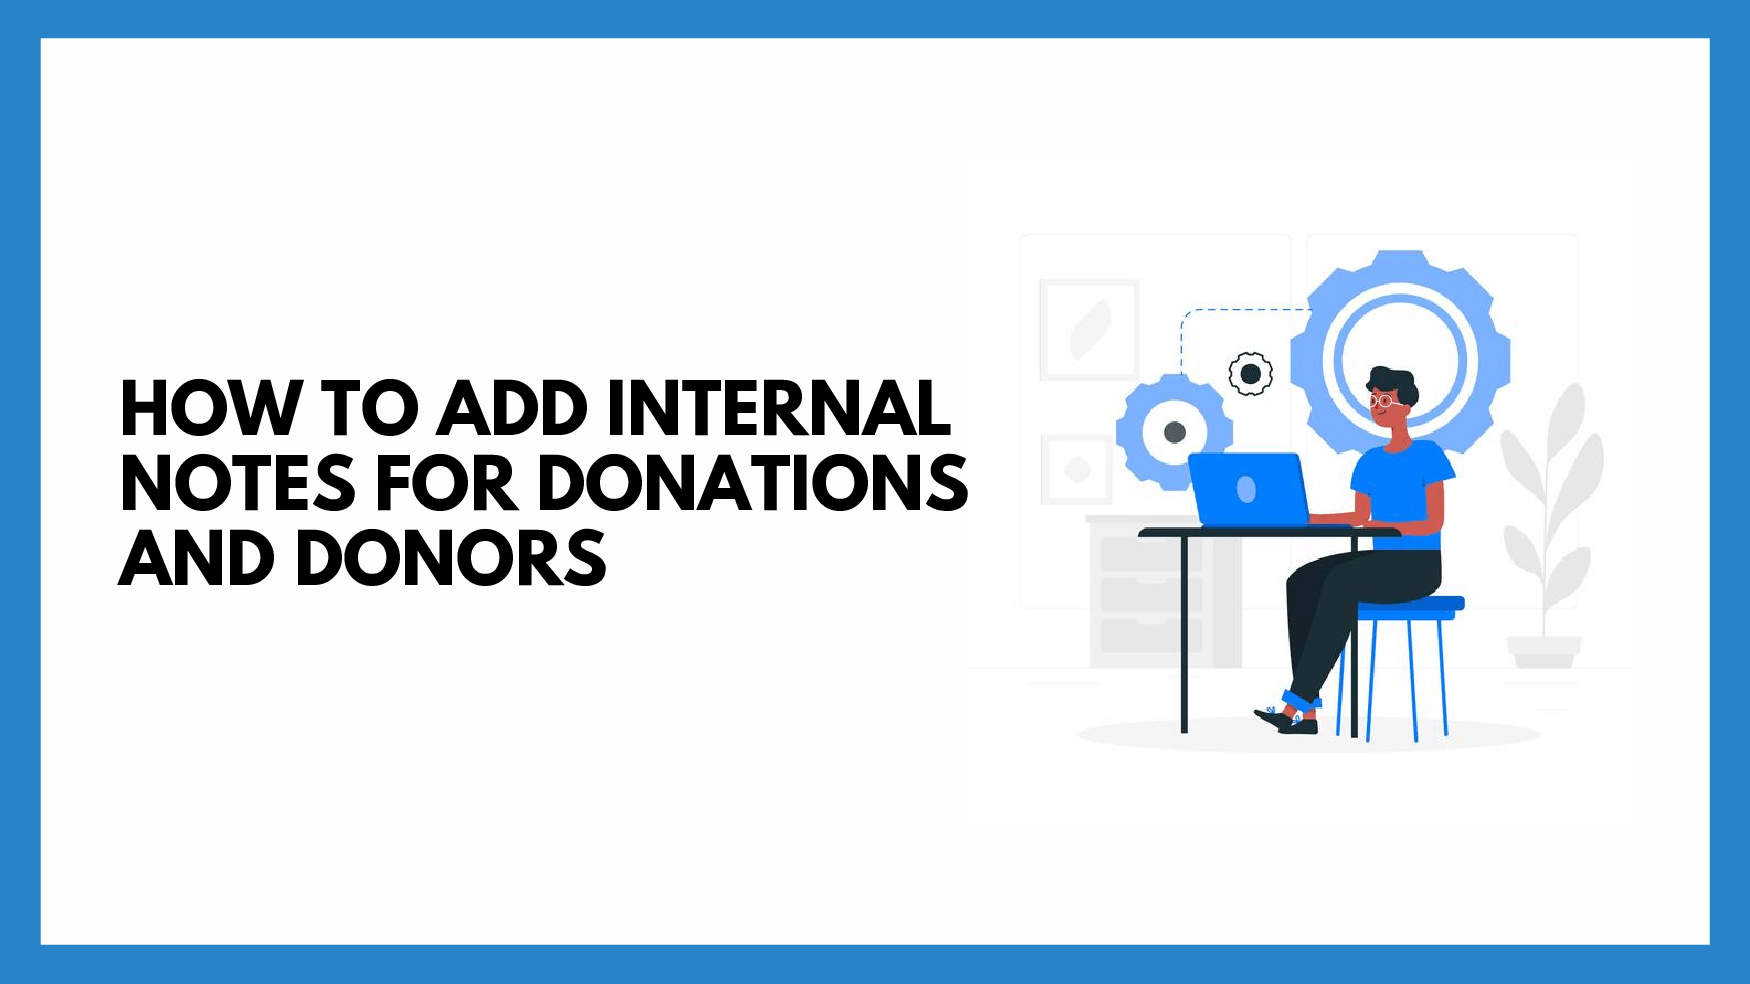 How To Add Internal Notes for Donations and Supporters